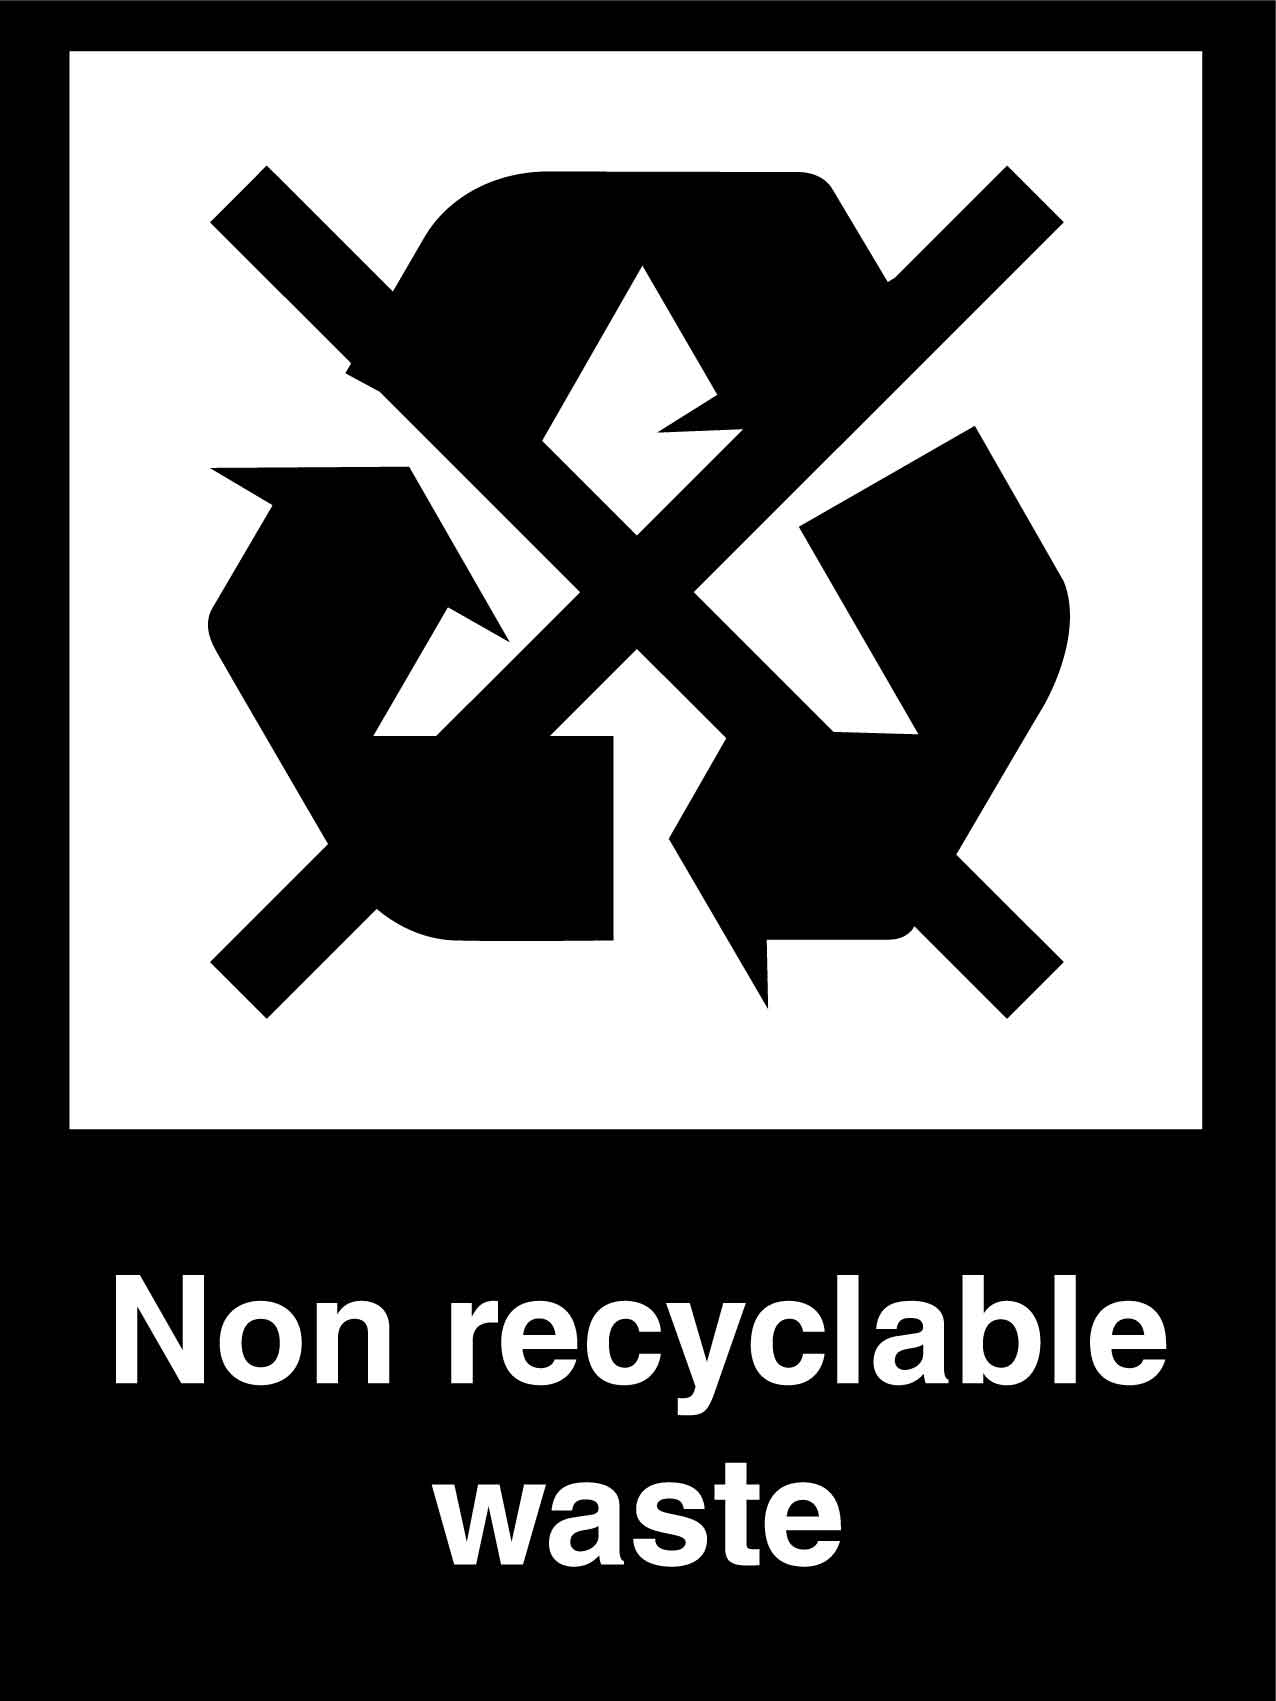 Recycle Non Recyclable Waste Sign